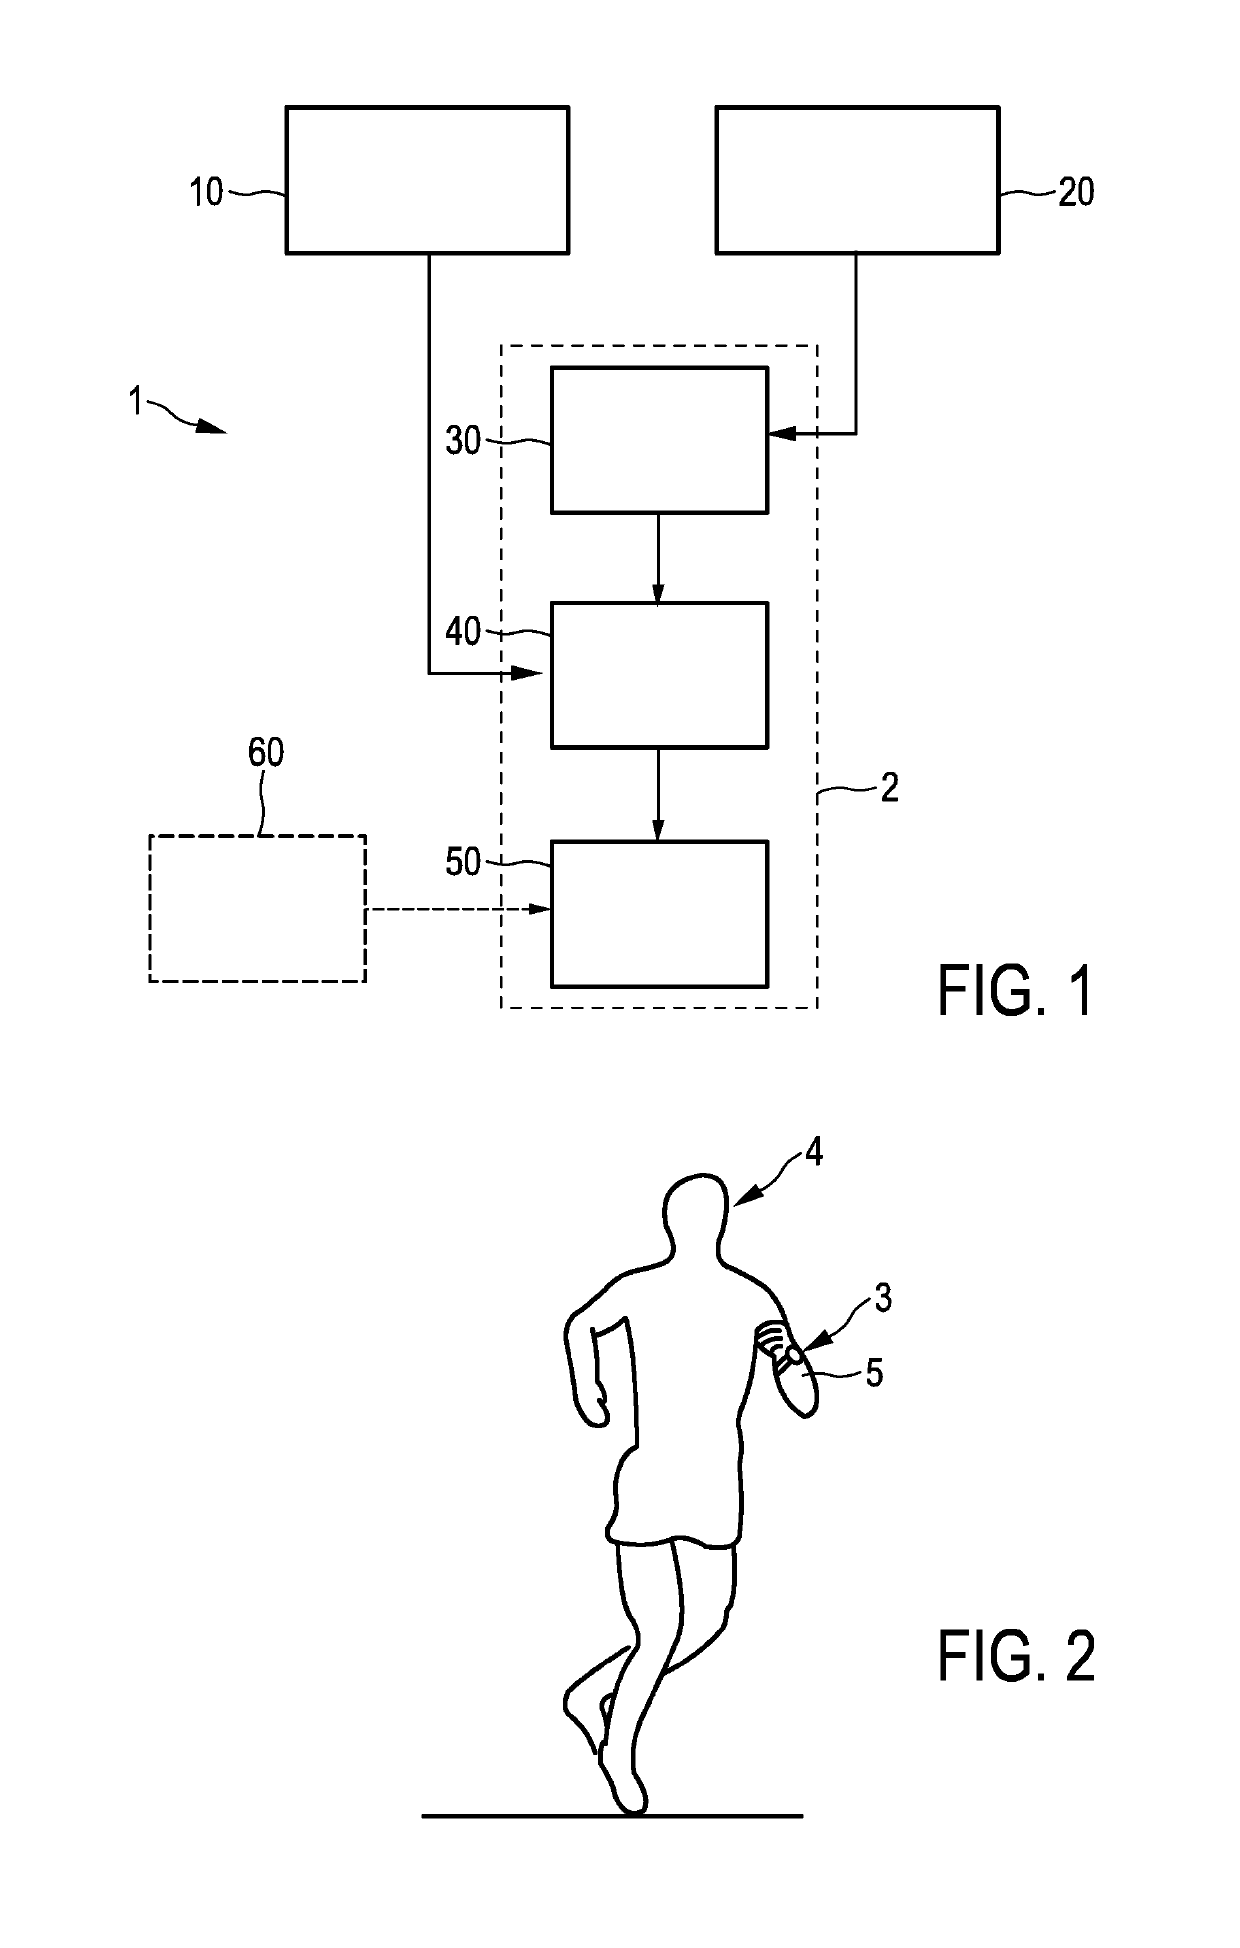 System and method for estimating cardiovascular fitness of a person